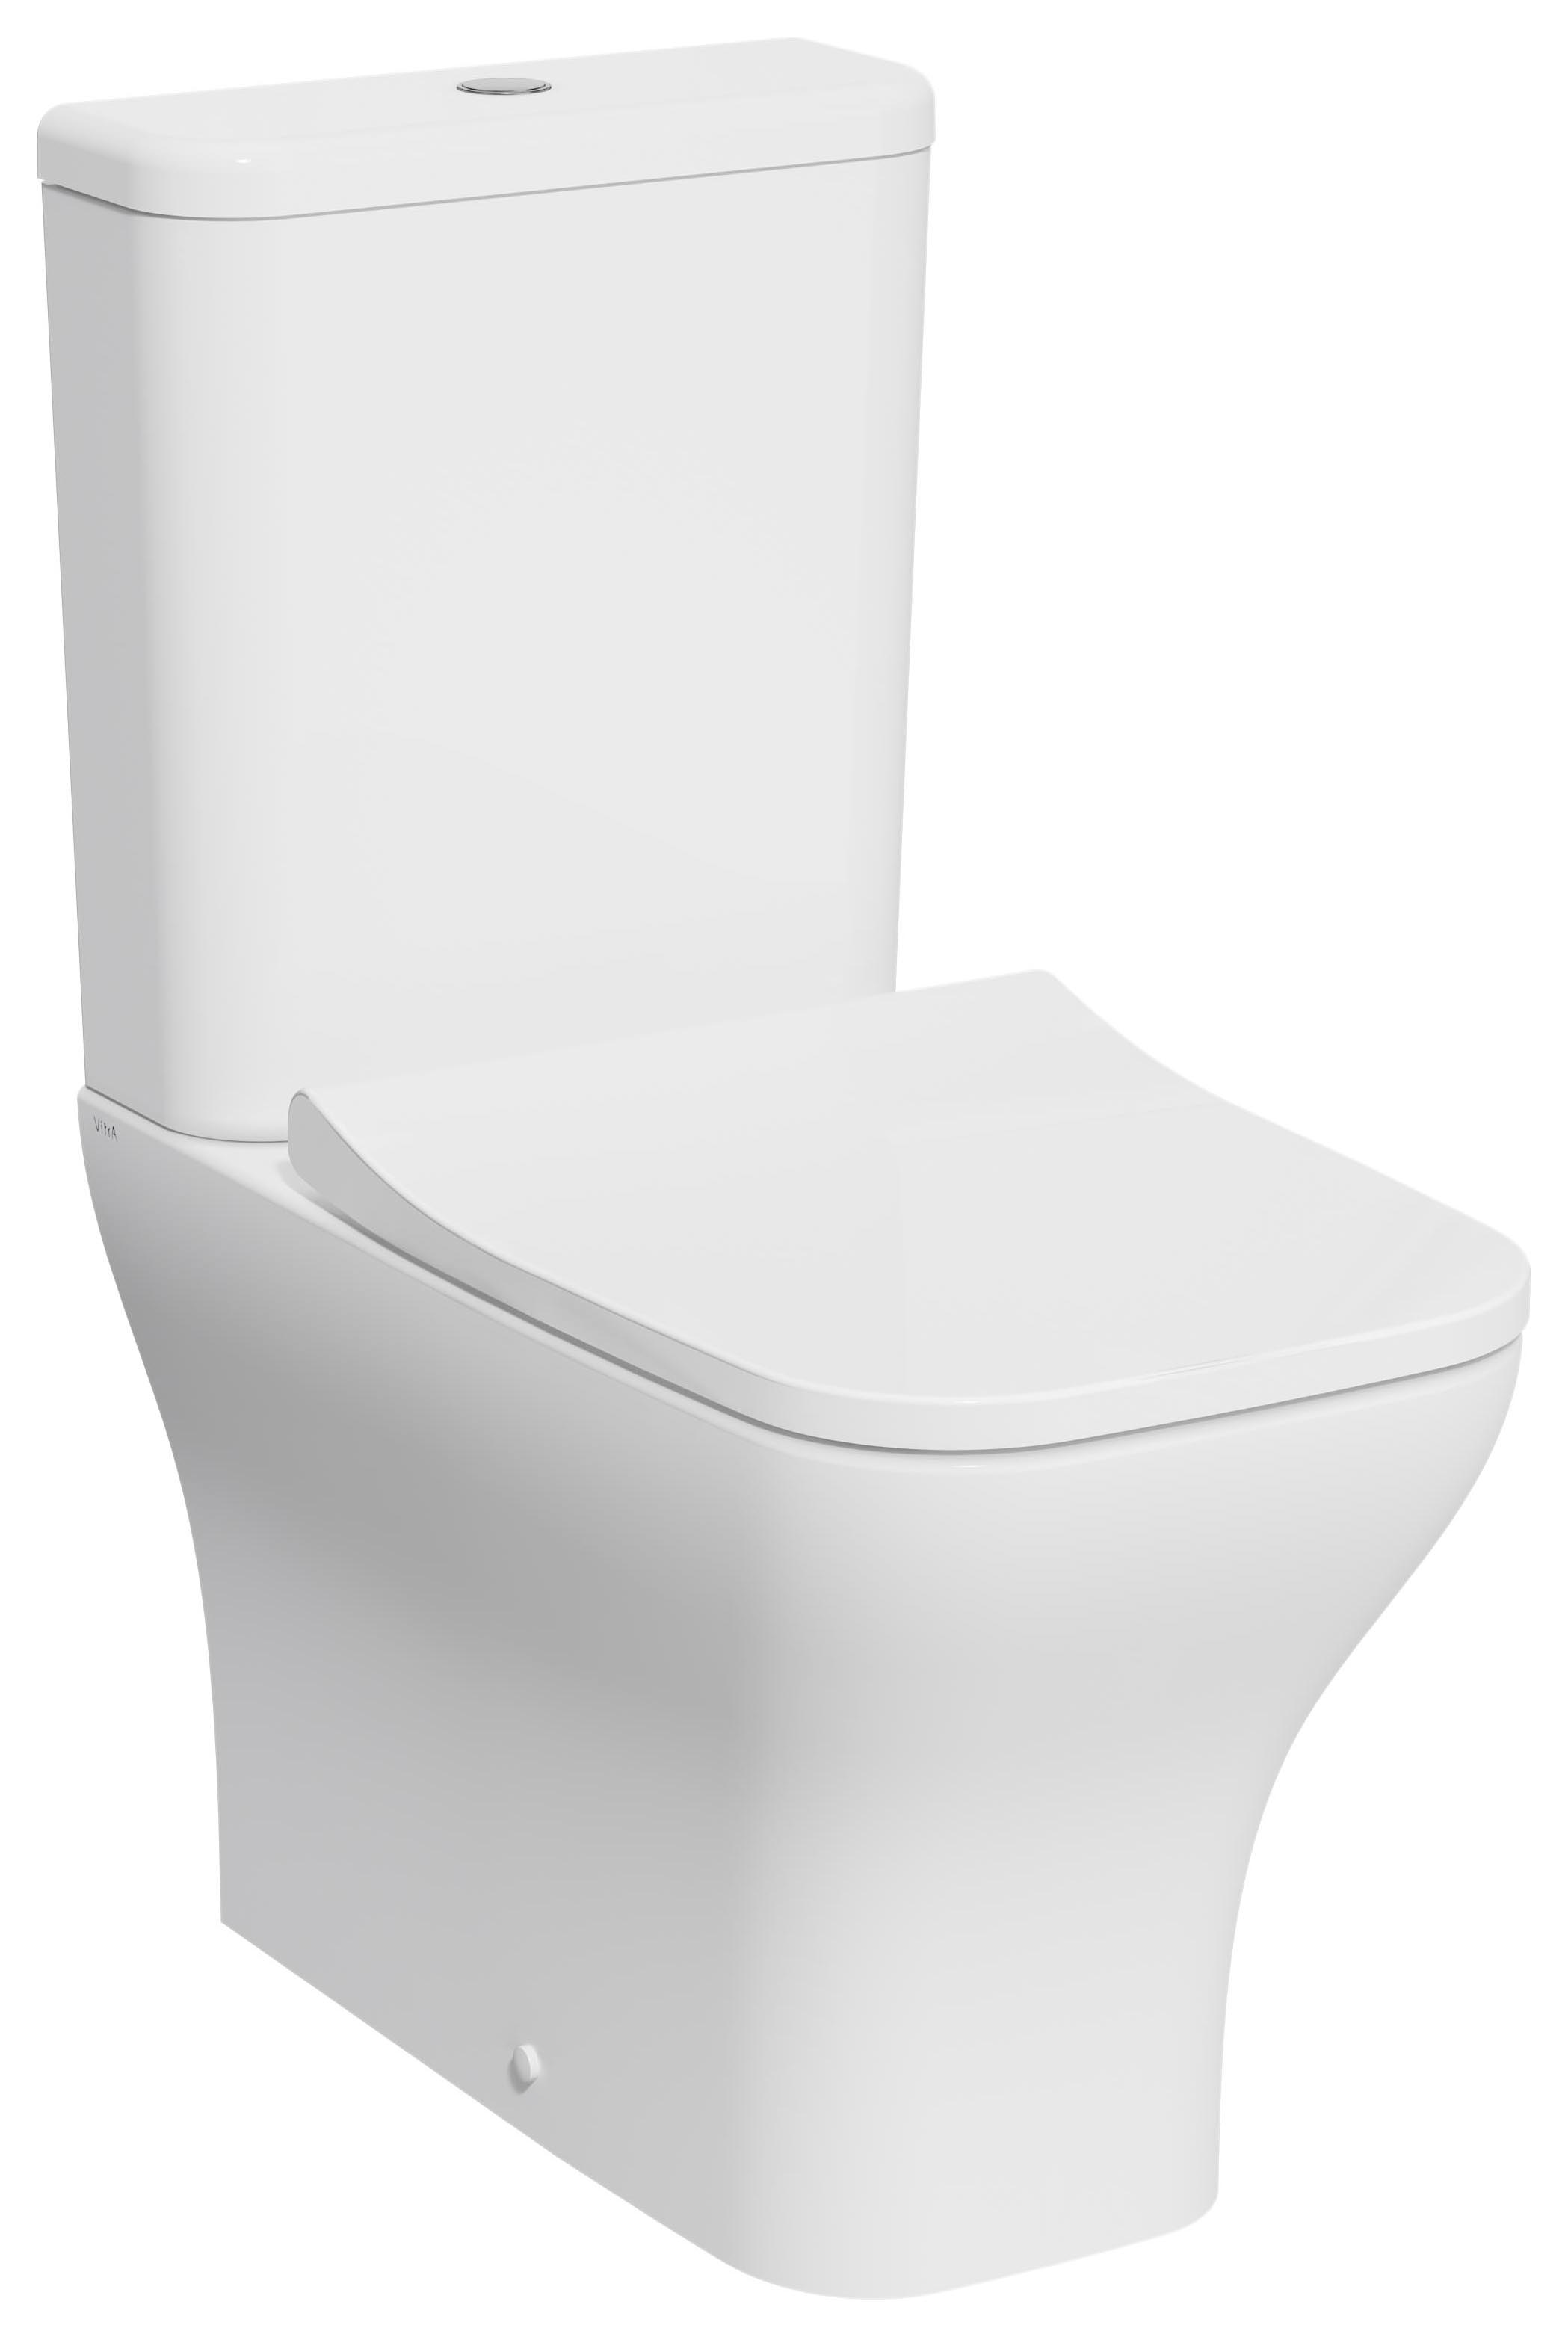 Kerala Square Smooth Flush Fully Shrouded Close Coupled Toilet Pan, Cistern & Soft Close Seat